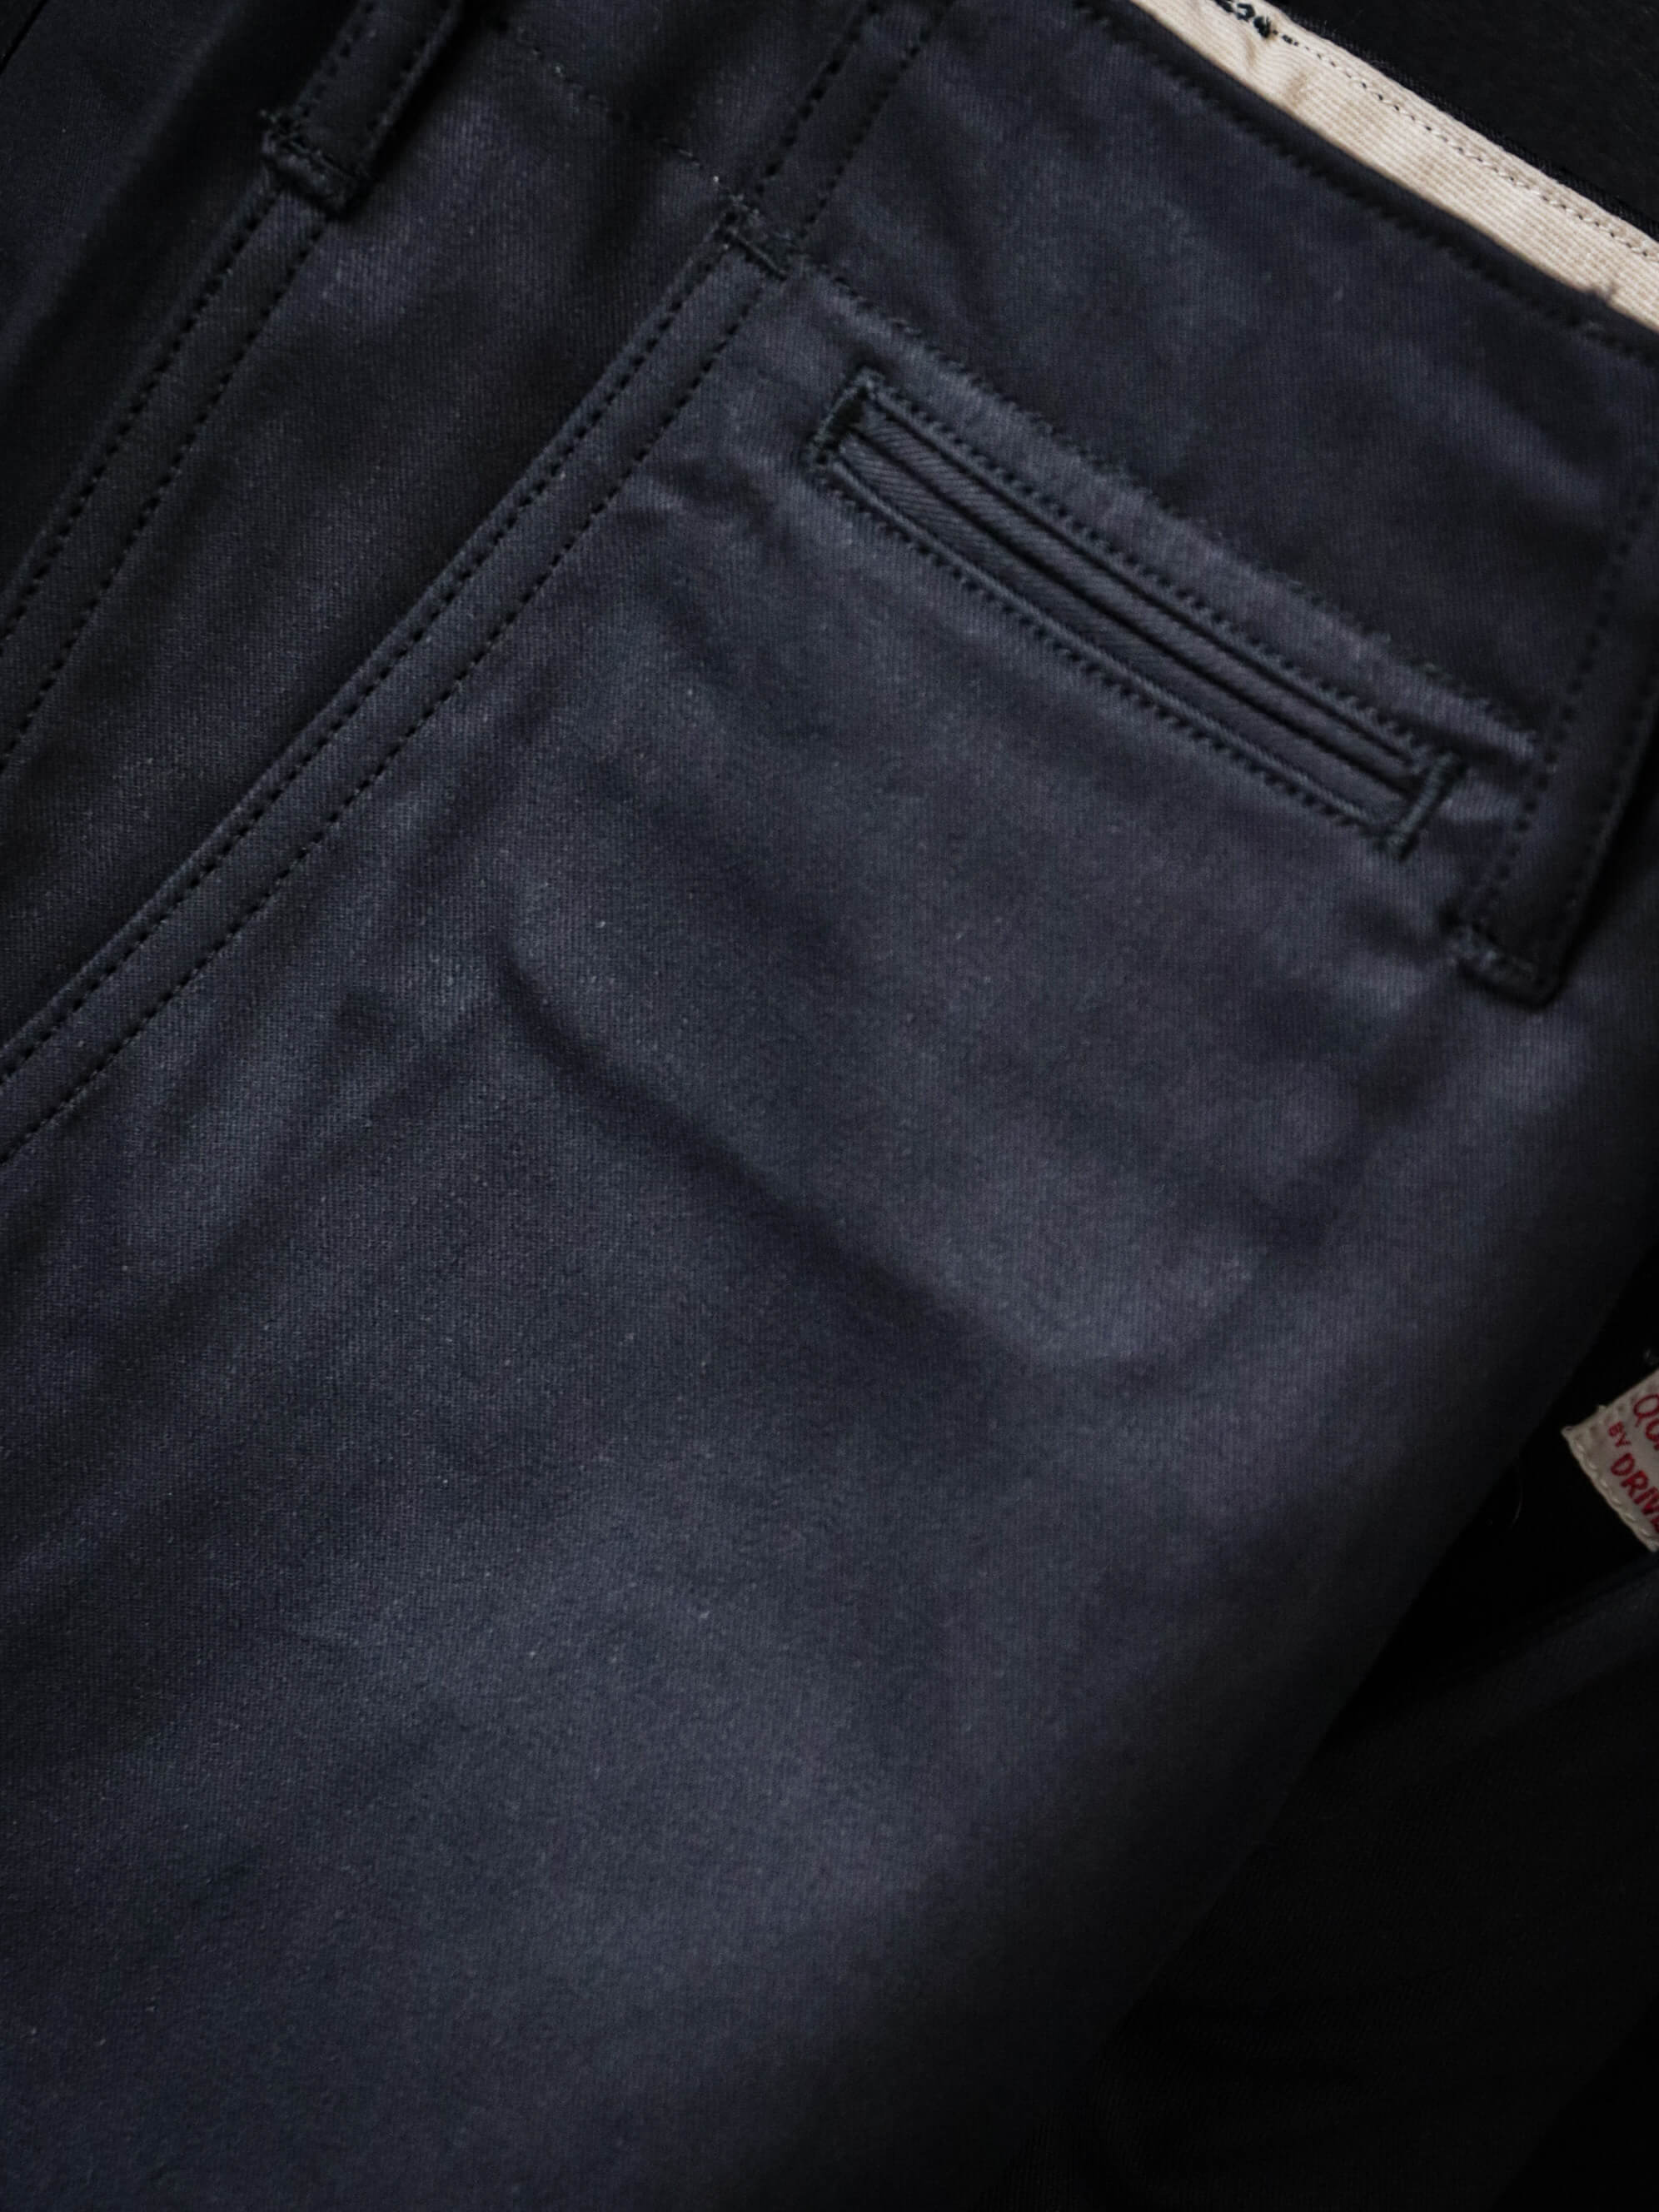 Classic Chino Trousers -Regular Fit-